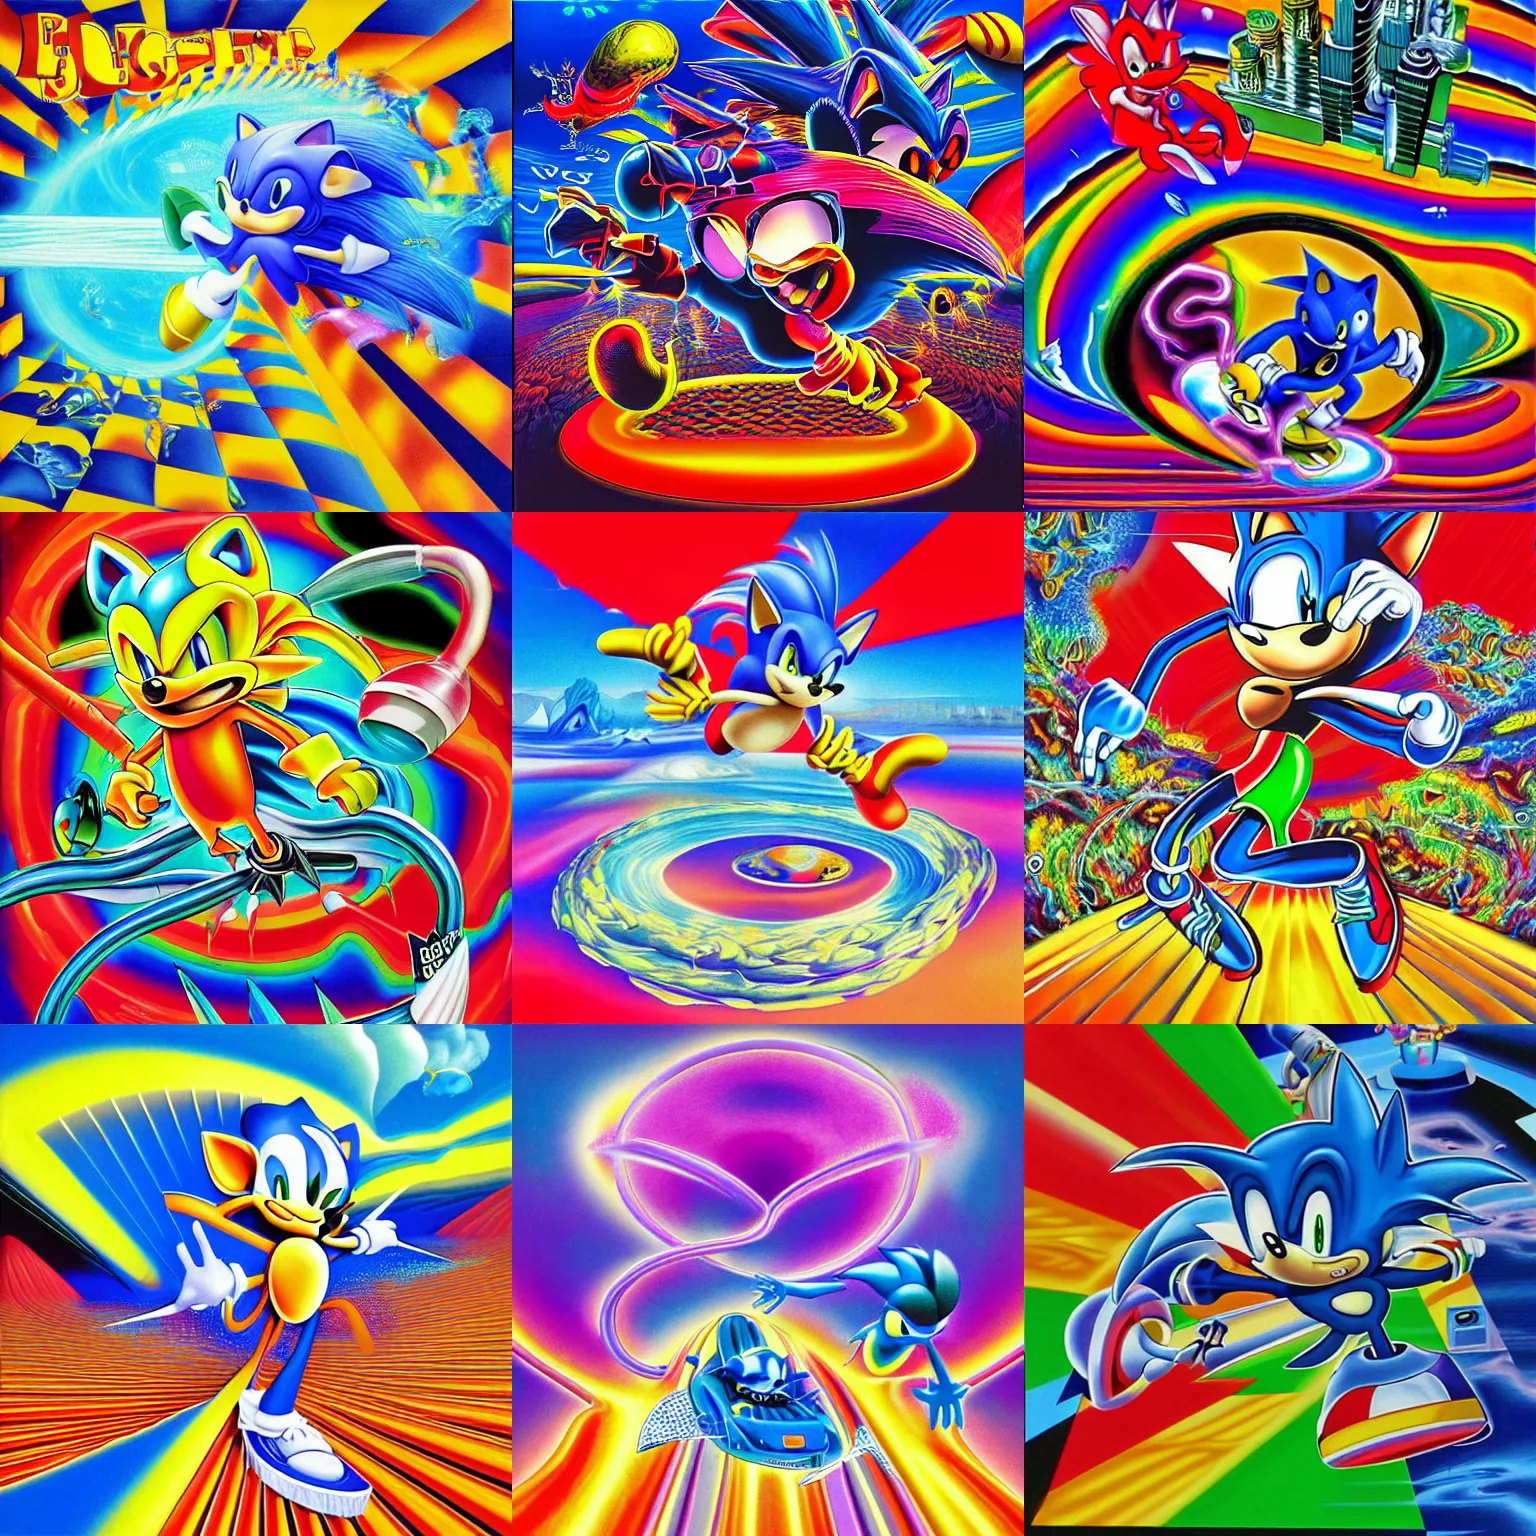 Prompt: surreal, sharp, detailed professional, high quality airbrush art mgmt album cover of a liquid dissolving airbrush art lsd dmt sonic the hedgehog surfing through cyberspace, holographic checkerboard background, 1 9 9 0 s 1 9 9 2 sega genesis video game album cover